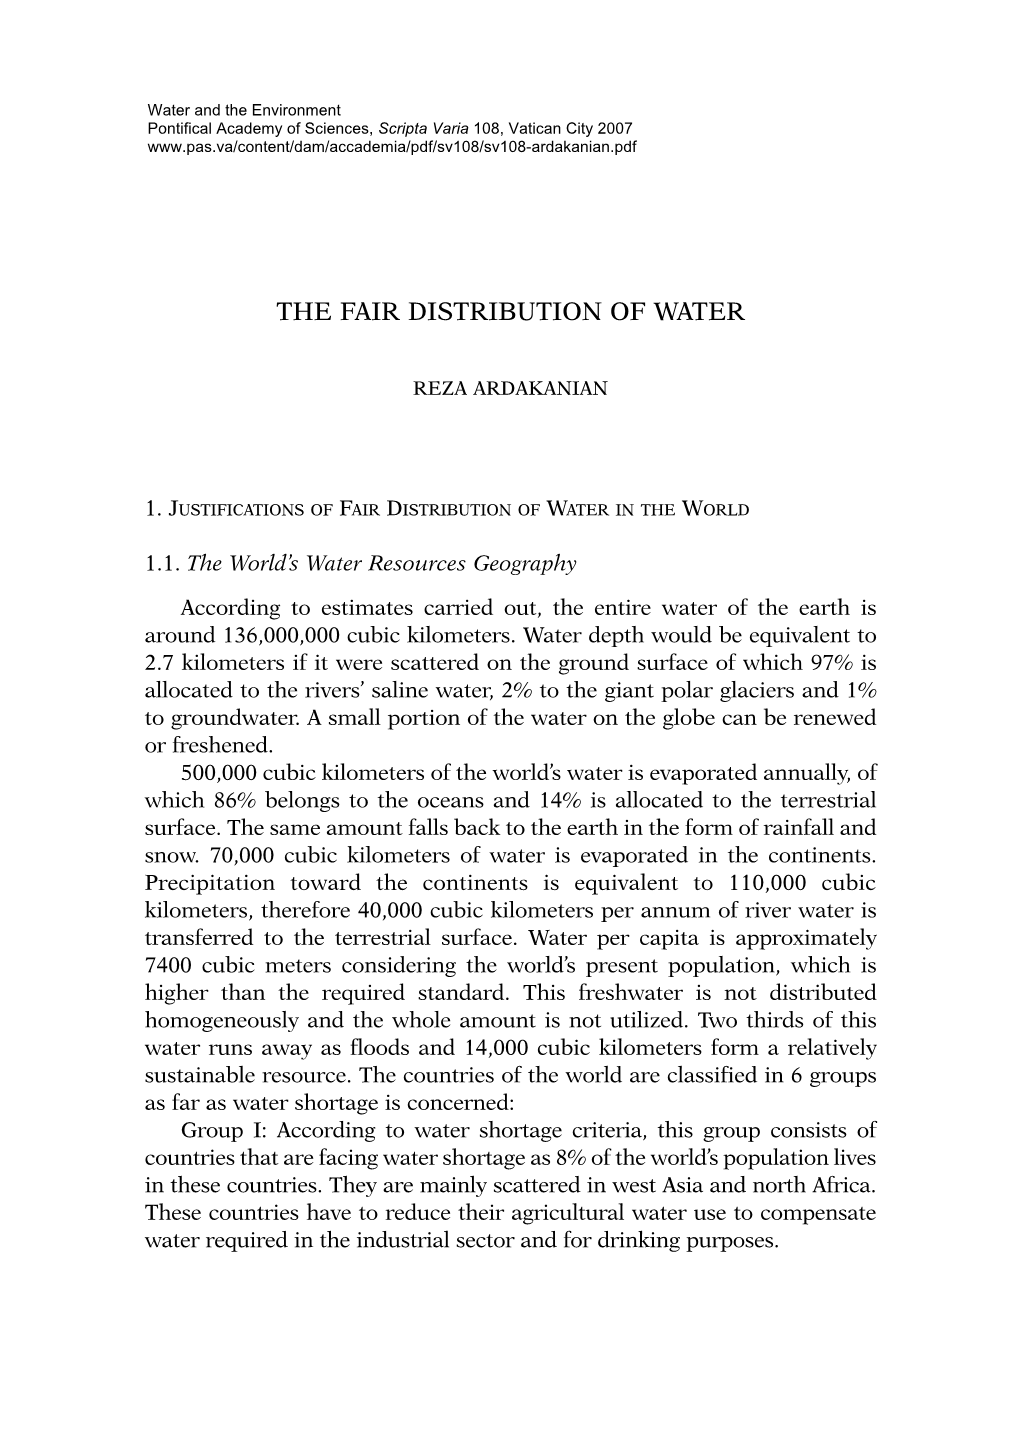 The Fair Distribution of Water